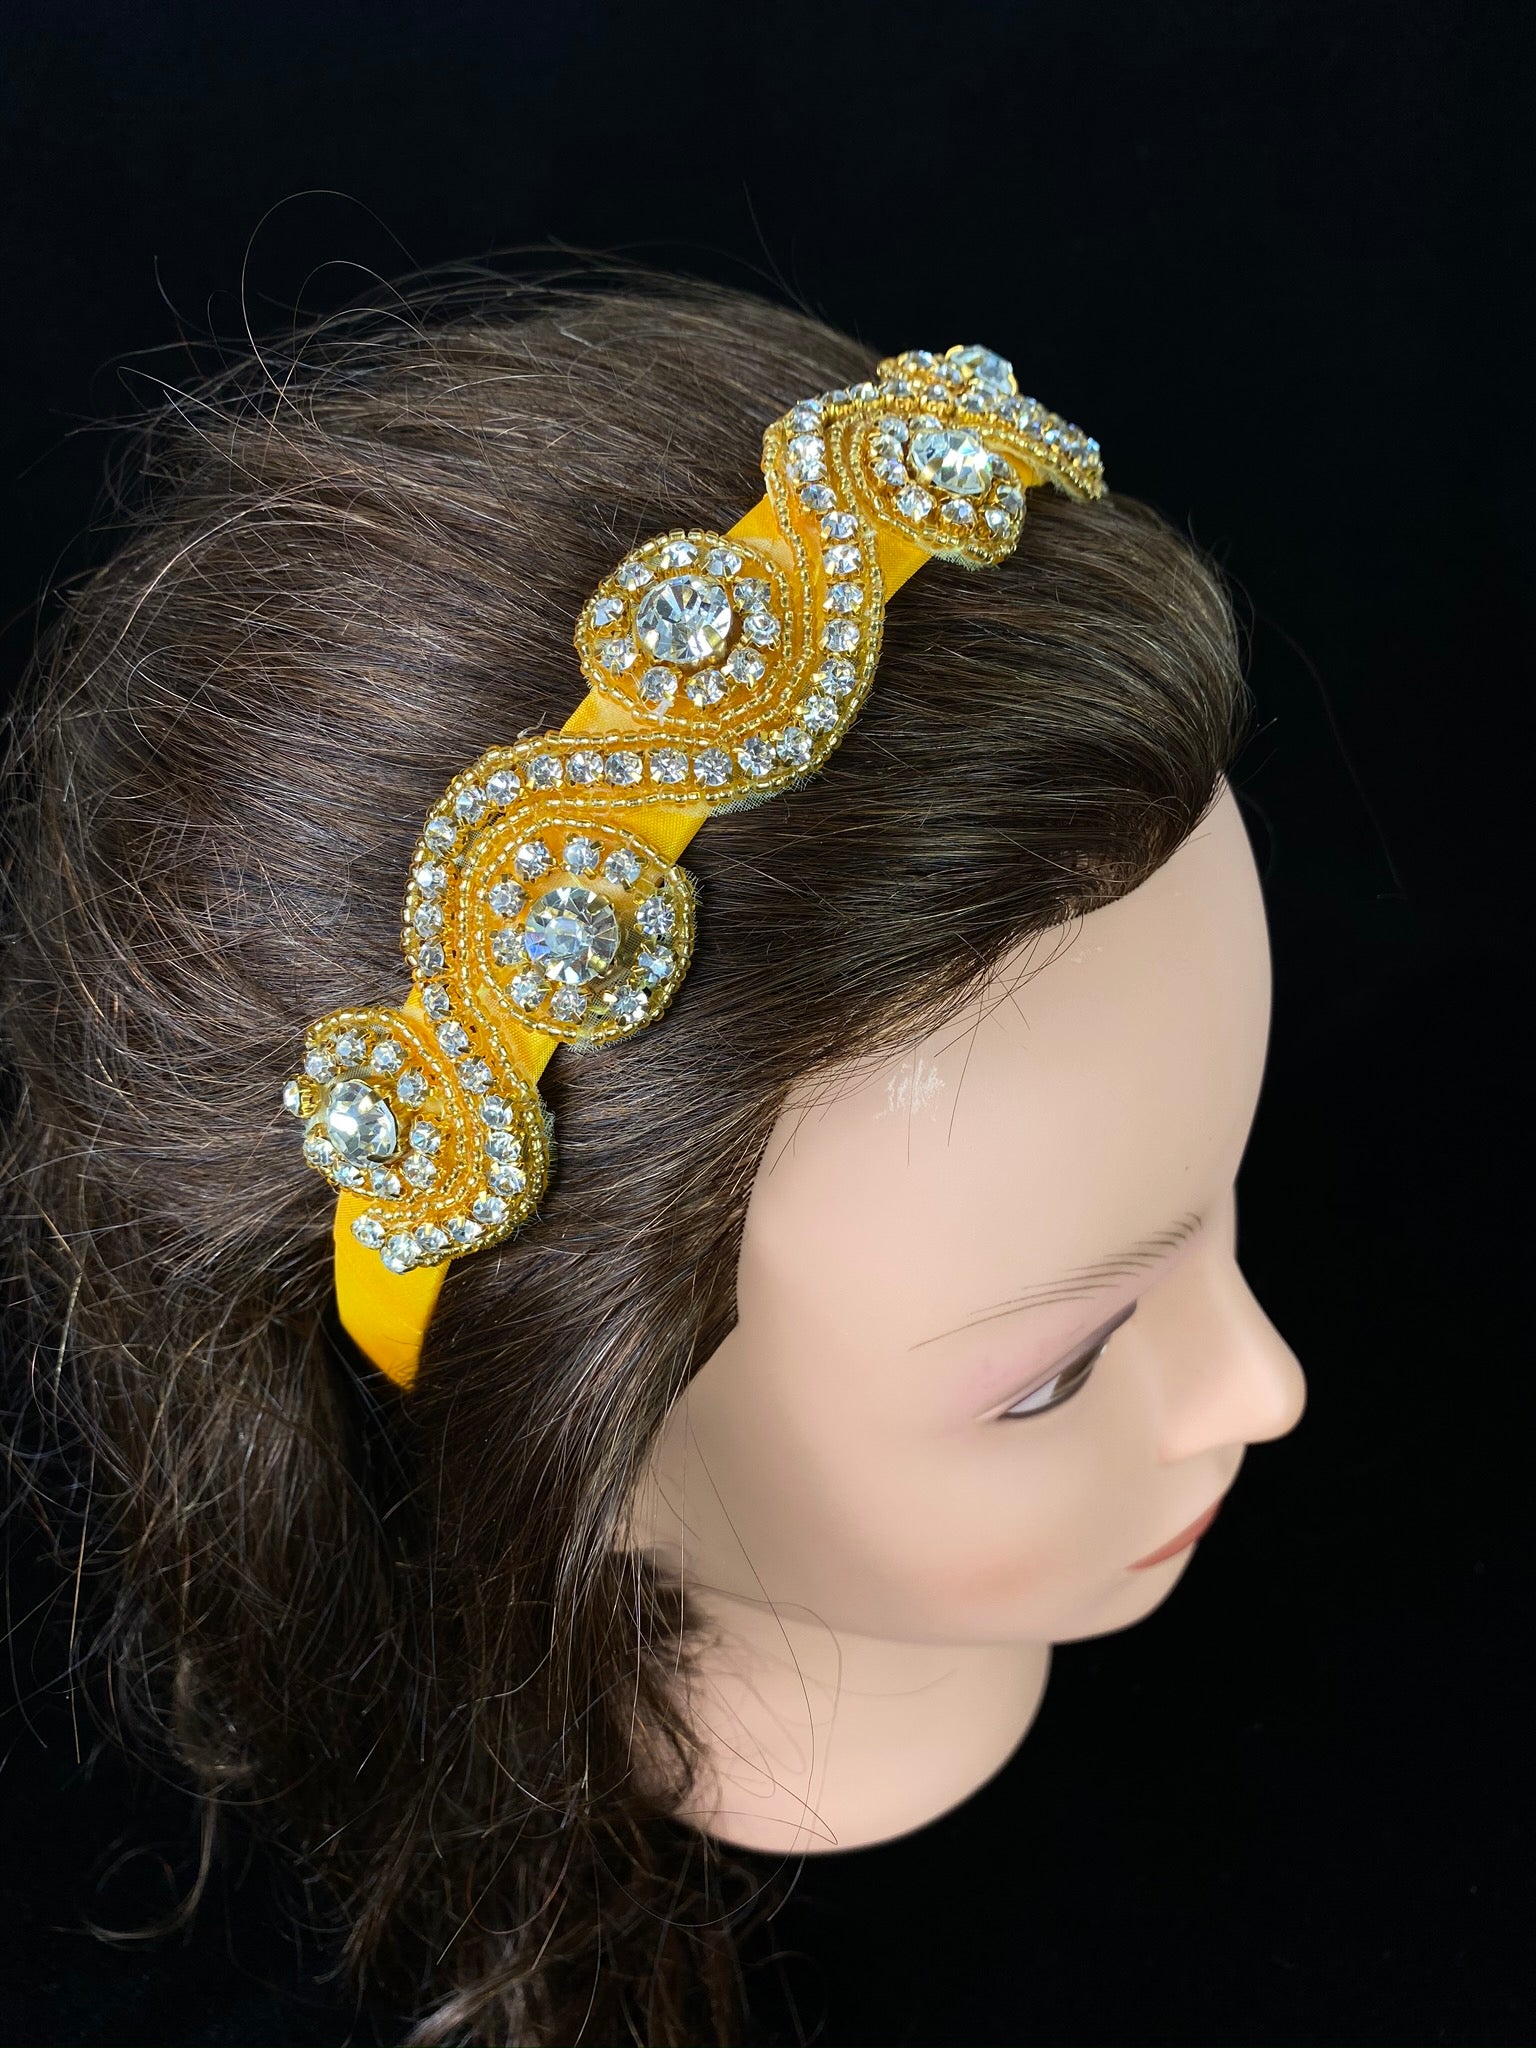 Headband - Yellow / Gold with Swirled Jewels  This is an elegant unique handmade and one-of-a-kind yellow / gold headband with rhinestone and gold beads.    This headband can be worn with dresses from Stelalysa's Celebration/Pageant Collection and for any occasion such Baptism or First Communion!  One size fits all.